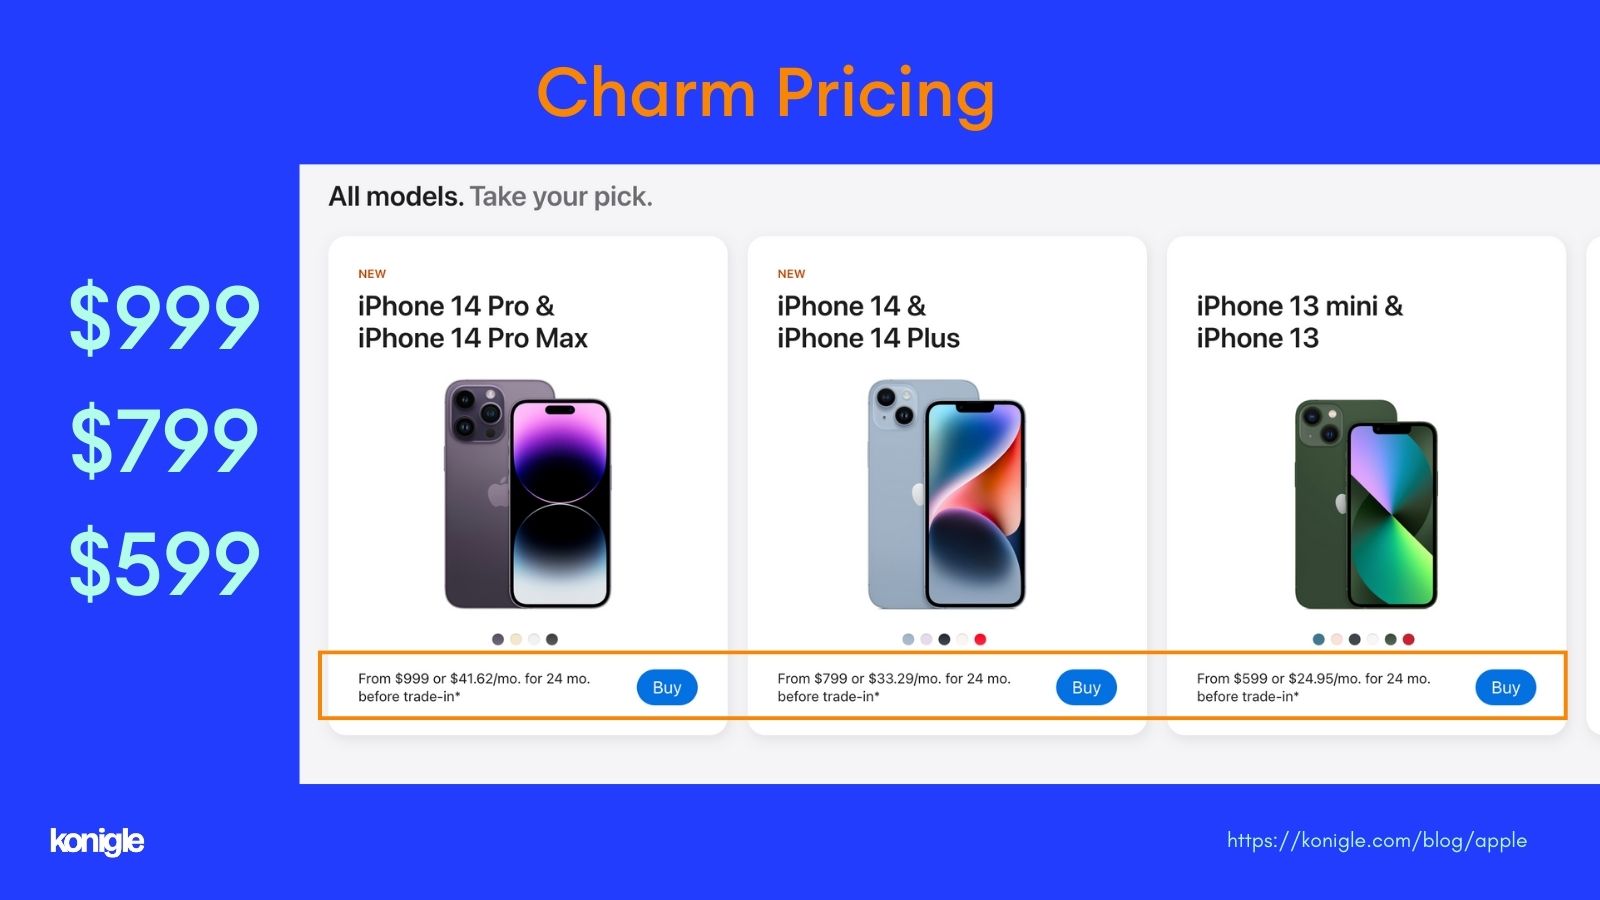 Apple uses prices ending in 9s for most of its products. This is called Charm Pricing.